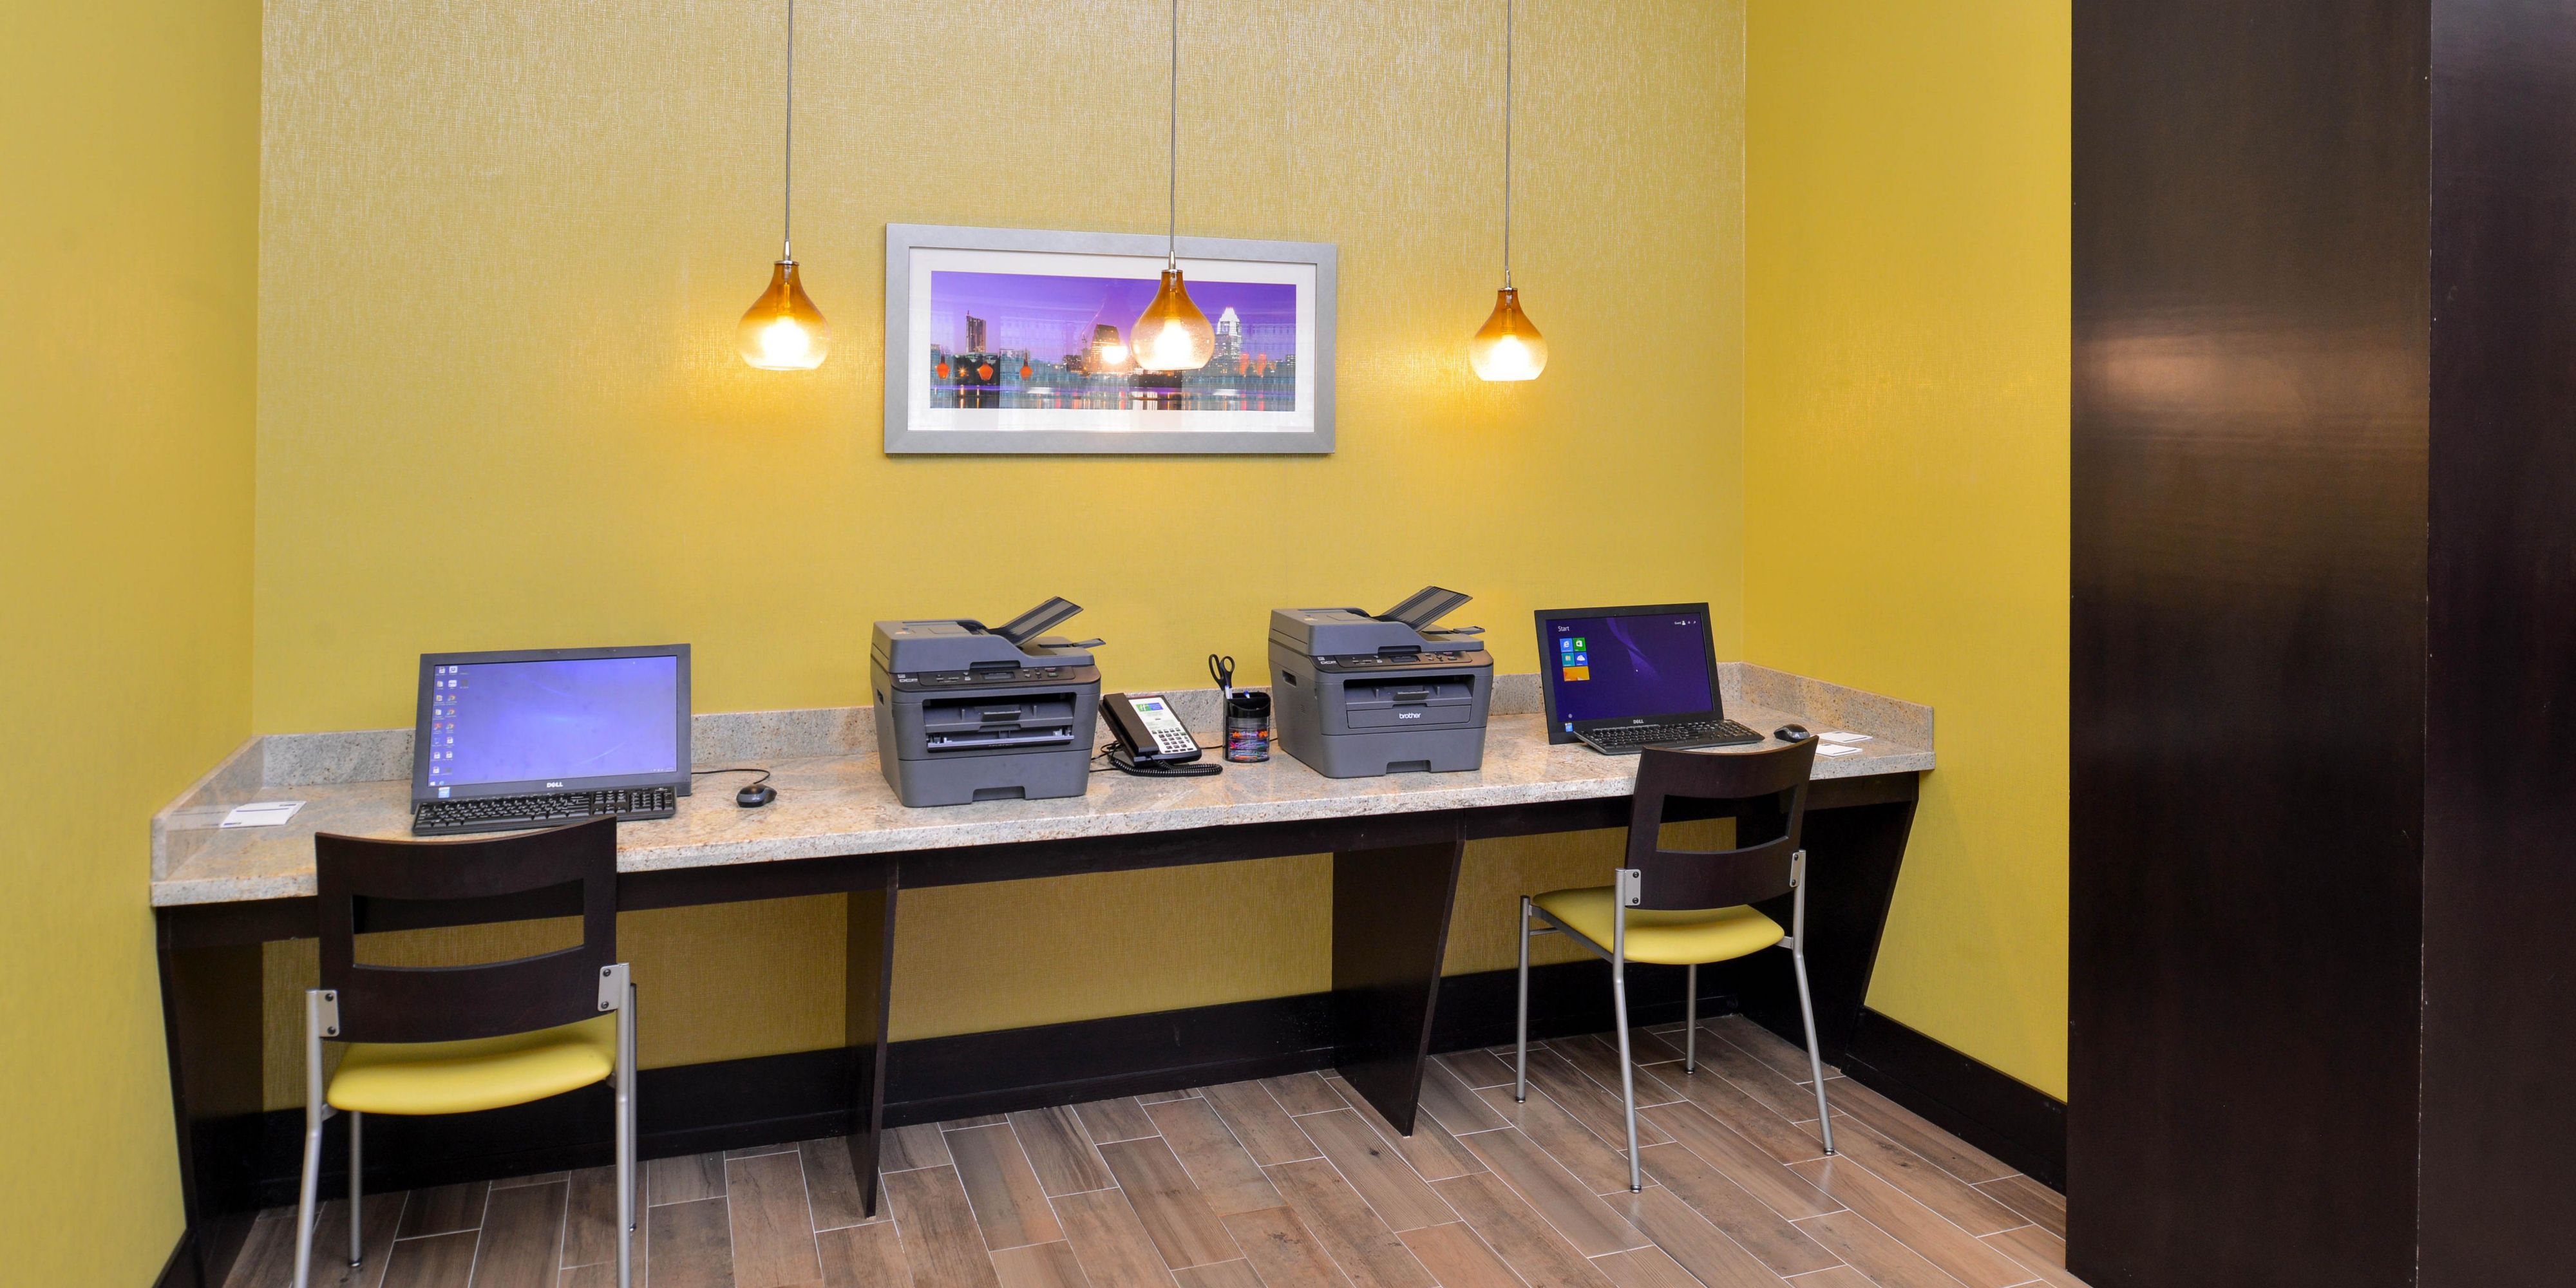 Need a computer to print out that last minute document for your meeting, we have you covered with our 24 hour business center!